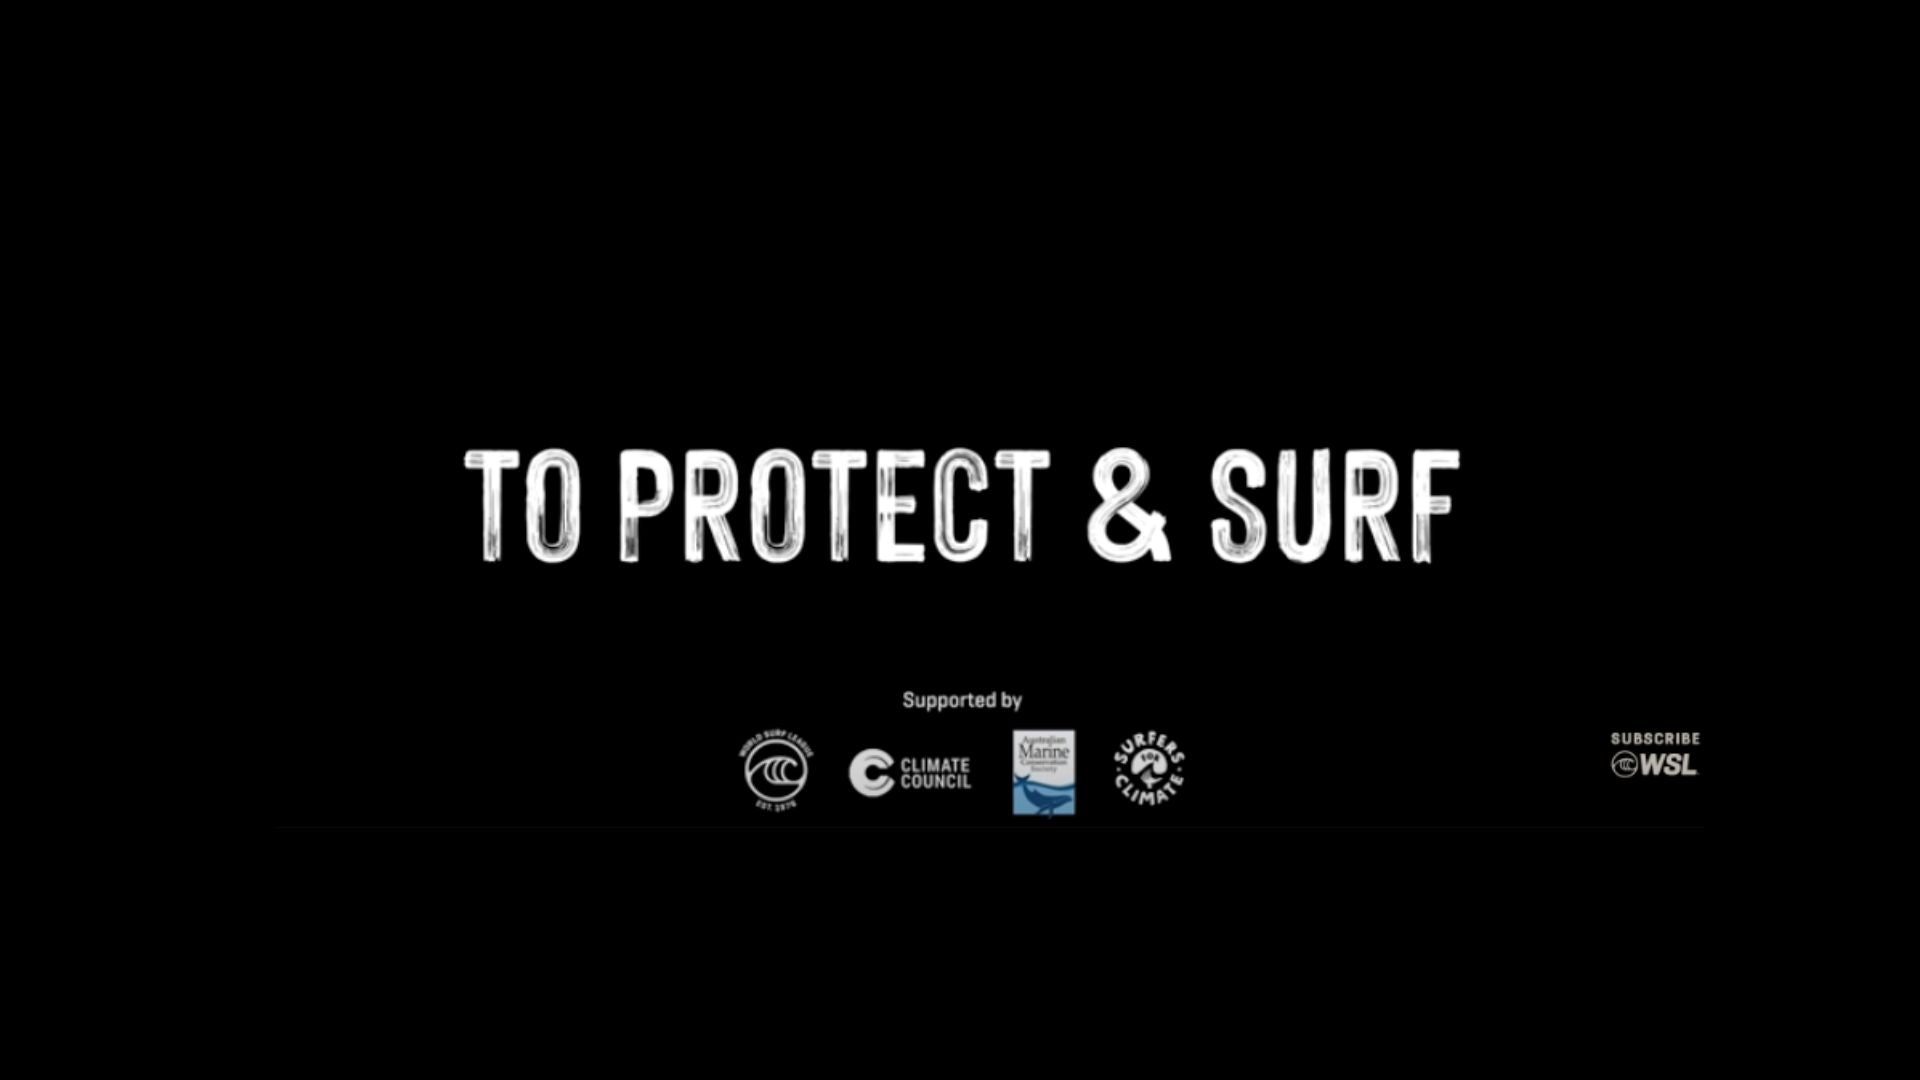 Load video: Ledendary musician Paul McCartney has teamed up with Jack McCoy and Surfers For Climate for the world exclusive music video premiere for Wine Dark Open Sea.